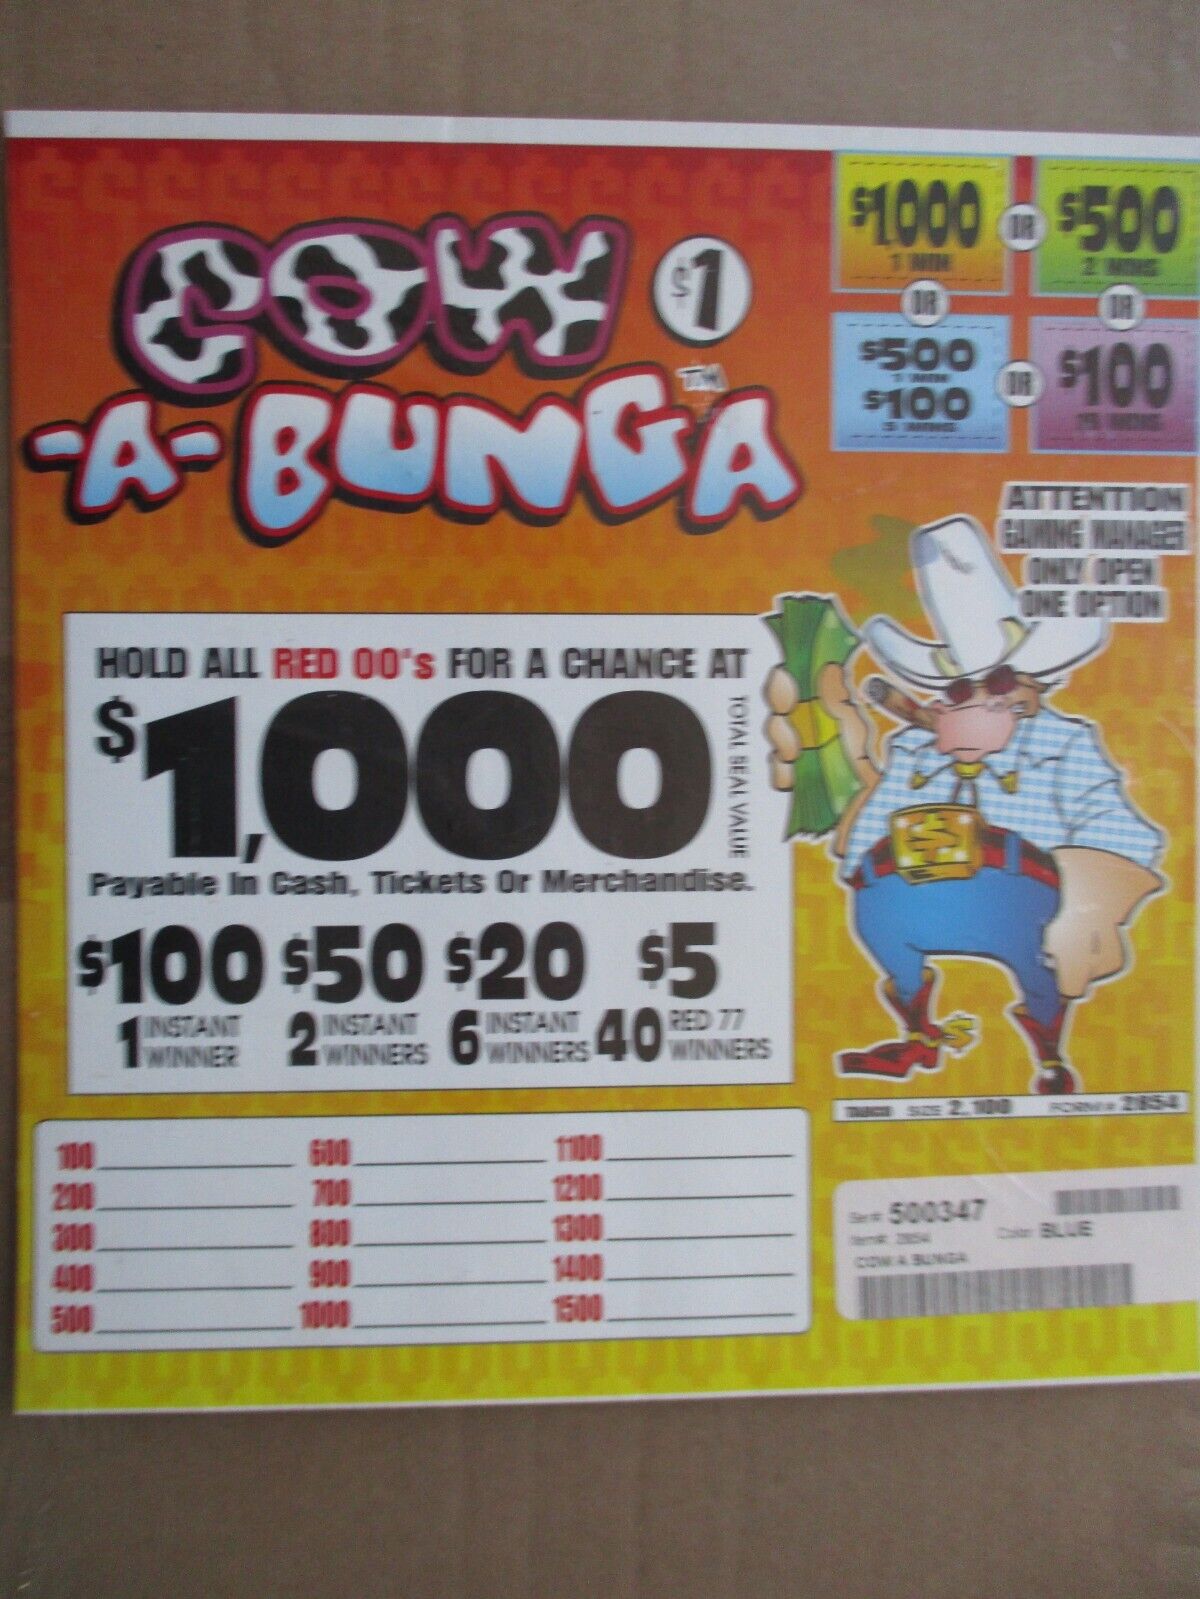 Cow-A-Bunga - NEW Sealed - Pull Tickets/Tab For Collectors/Amusement